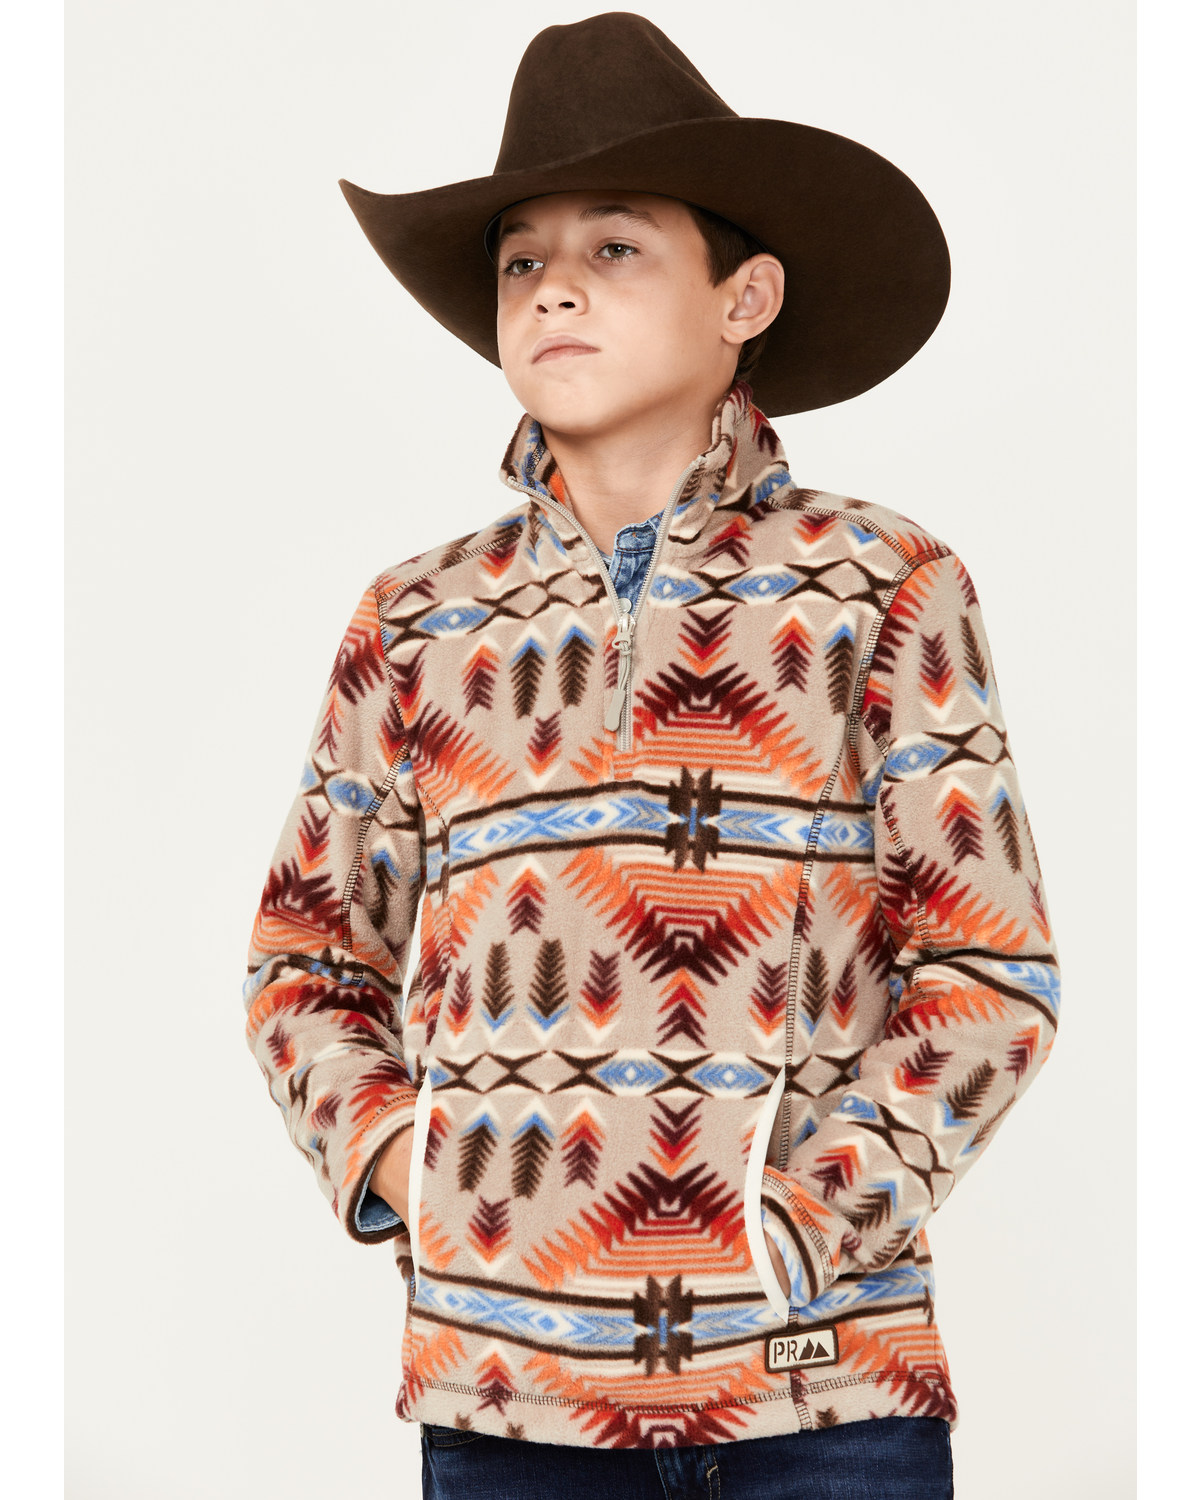 Powder River Outfitters Boys' Southwestern Print Fleece Pullover